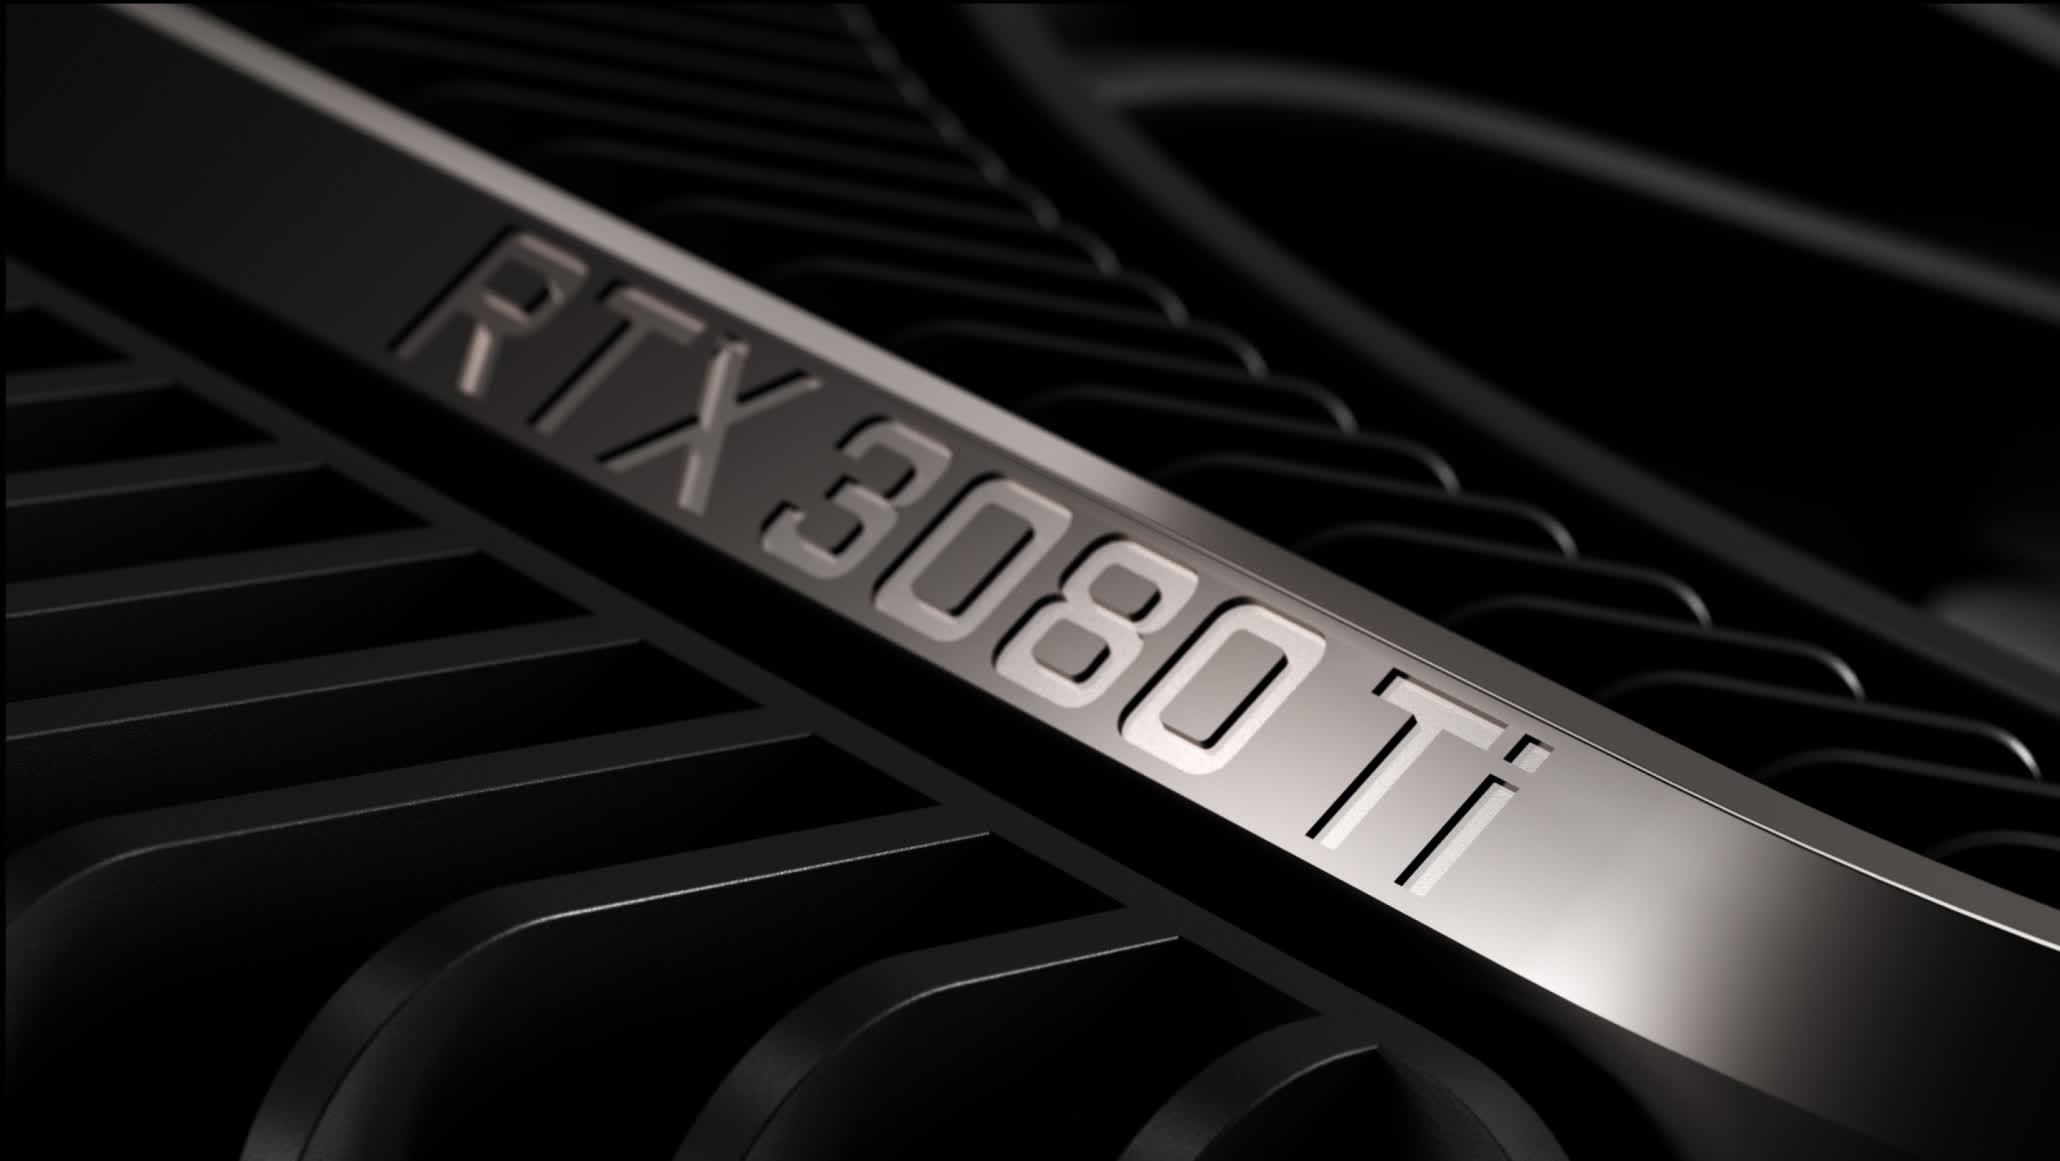 Nvidia unveils the GeForce RTX 3080 Ti: RTX 3090-like performance at $1,200; RTX 3070 Ti arrives on June 10 for $600